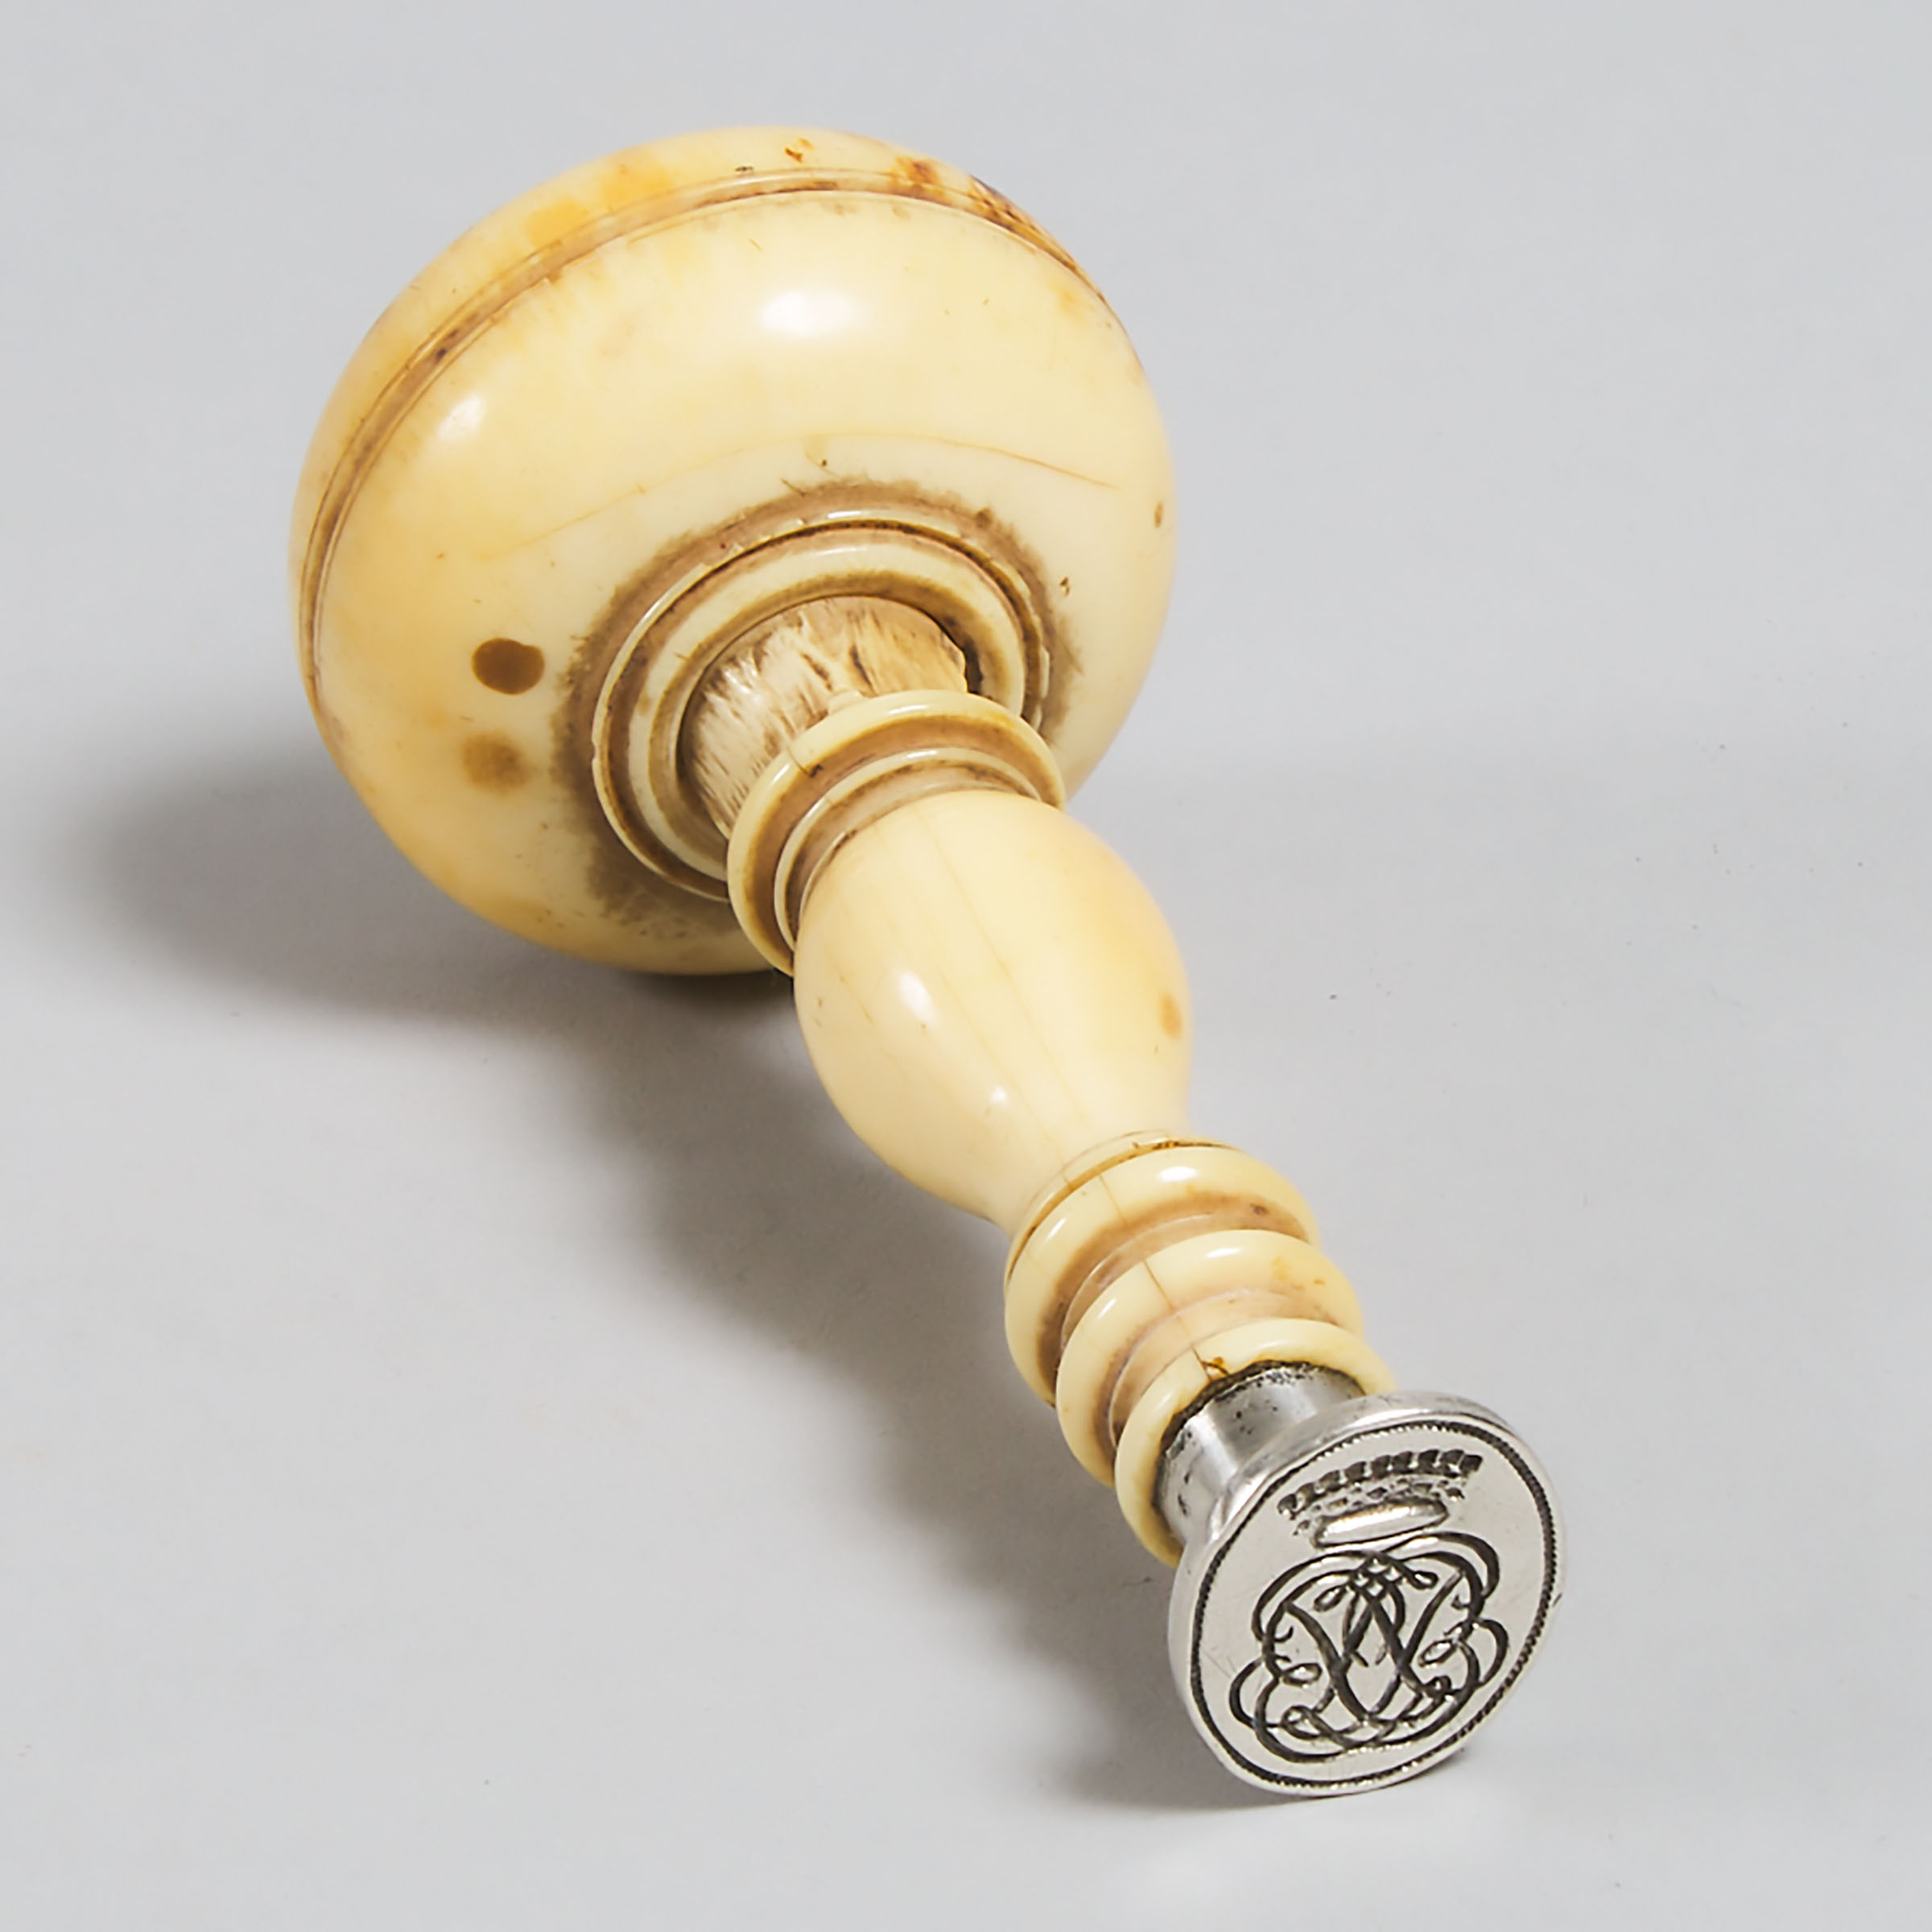 French Ivory Mounted Silver Desk Seal, 19th century